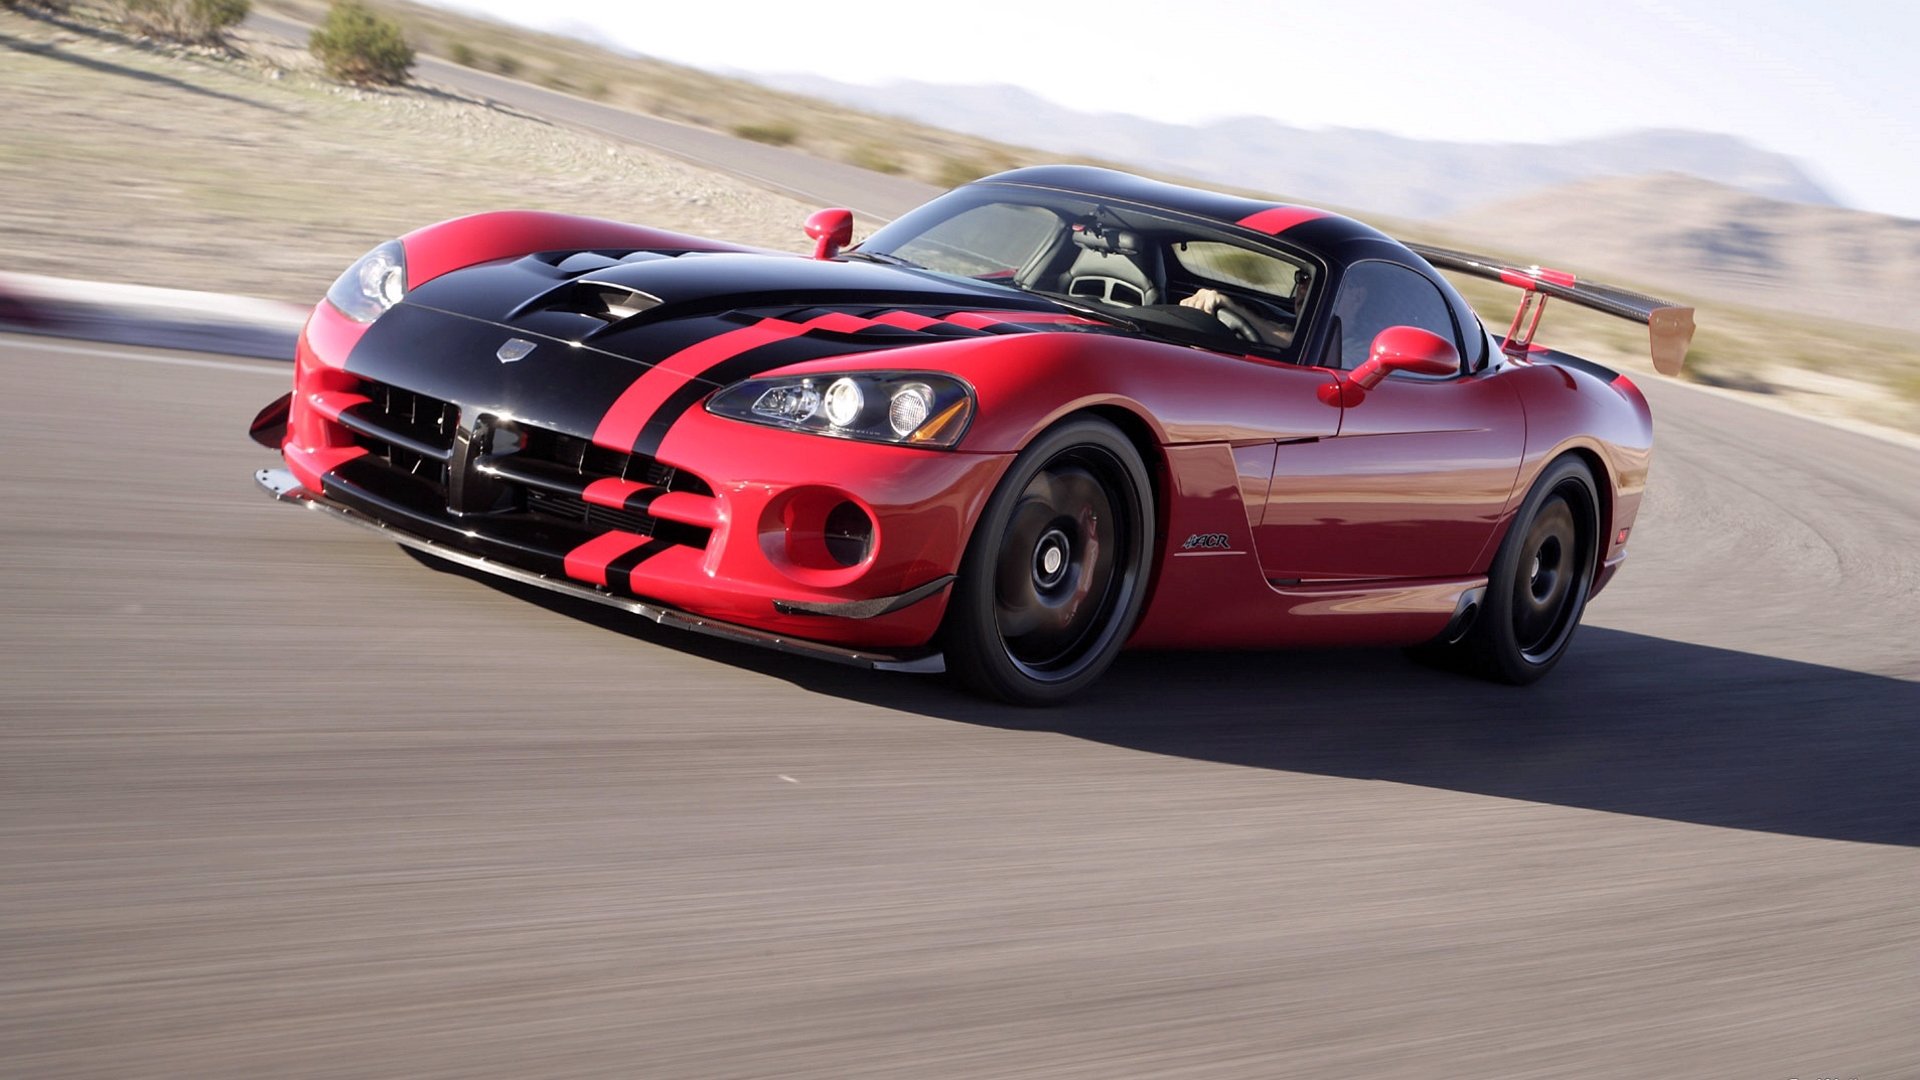 Awesome Dodge Viper free background ID:8352 for full hd 1920x1080 desktop